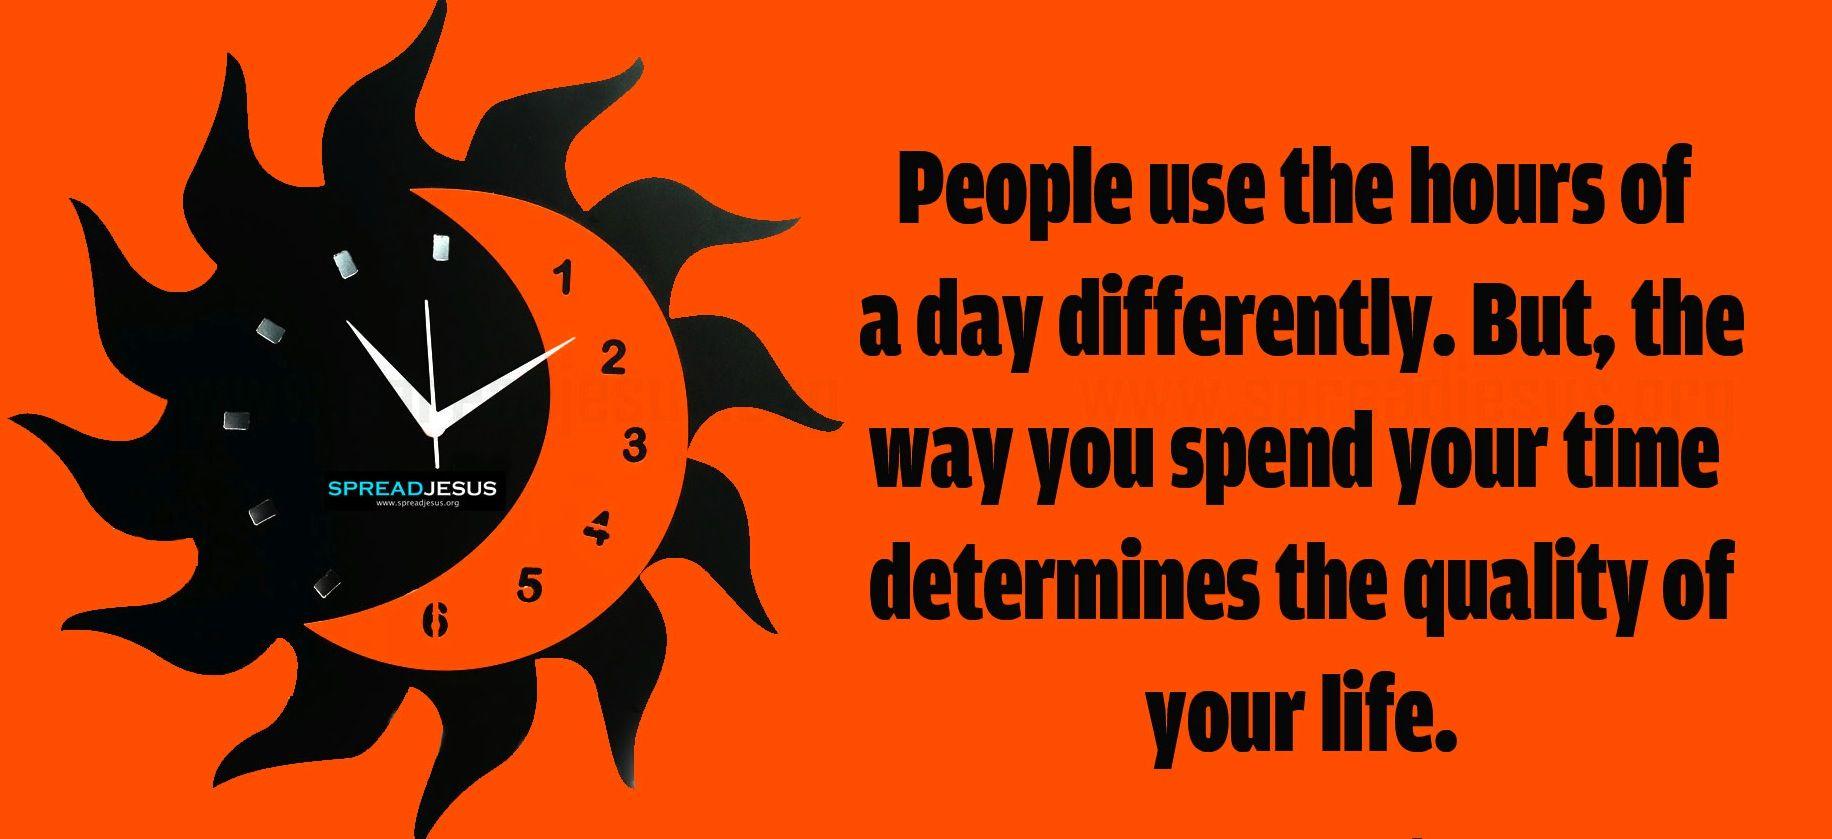 TIME MANAGEMENT QUOTES HD WALLPAPER Use Of Time Determines The